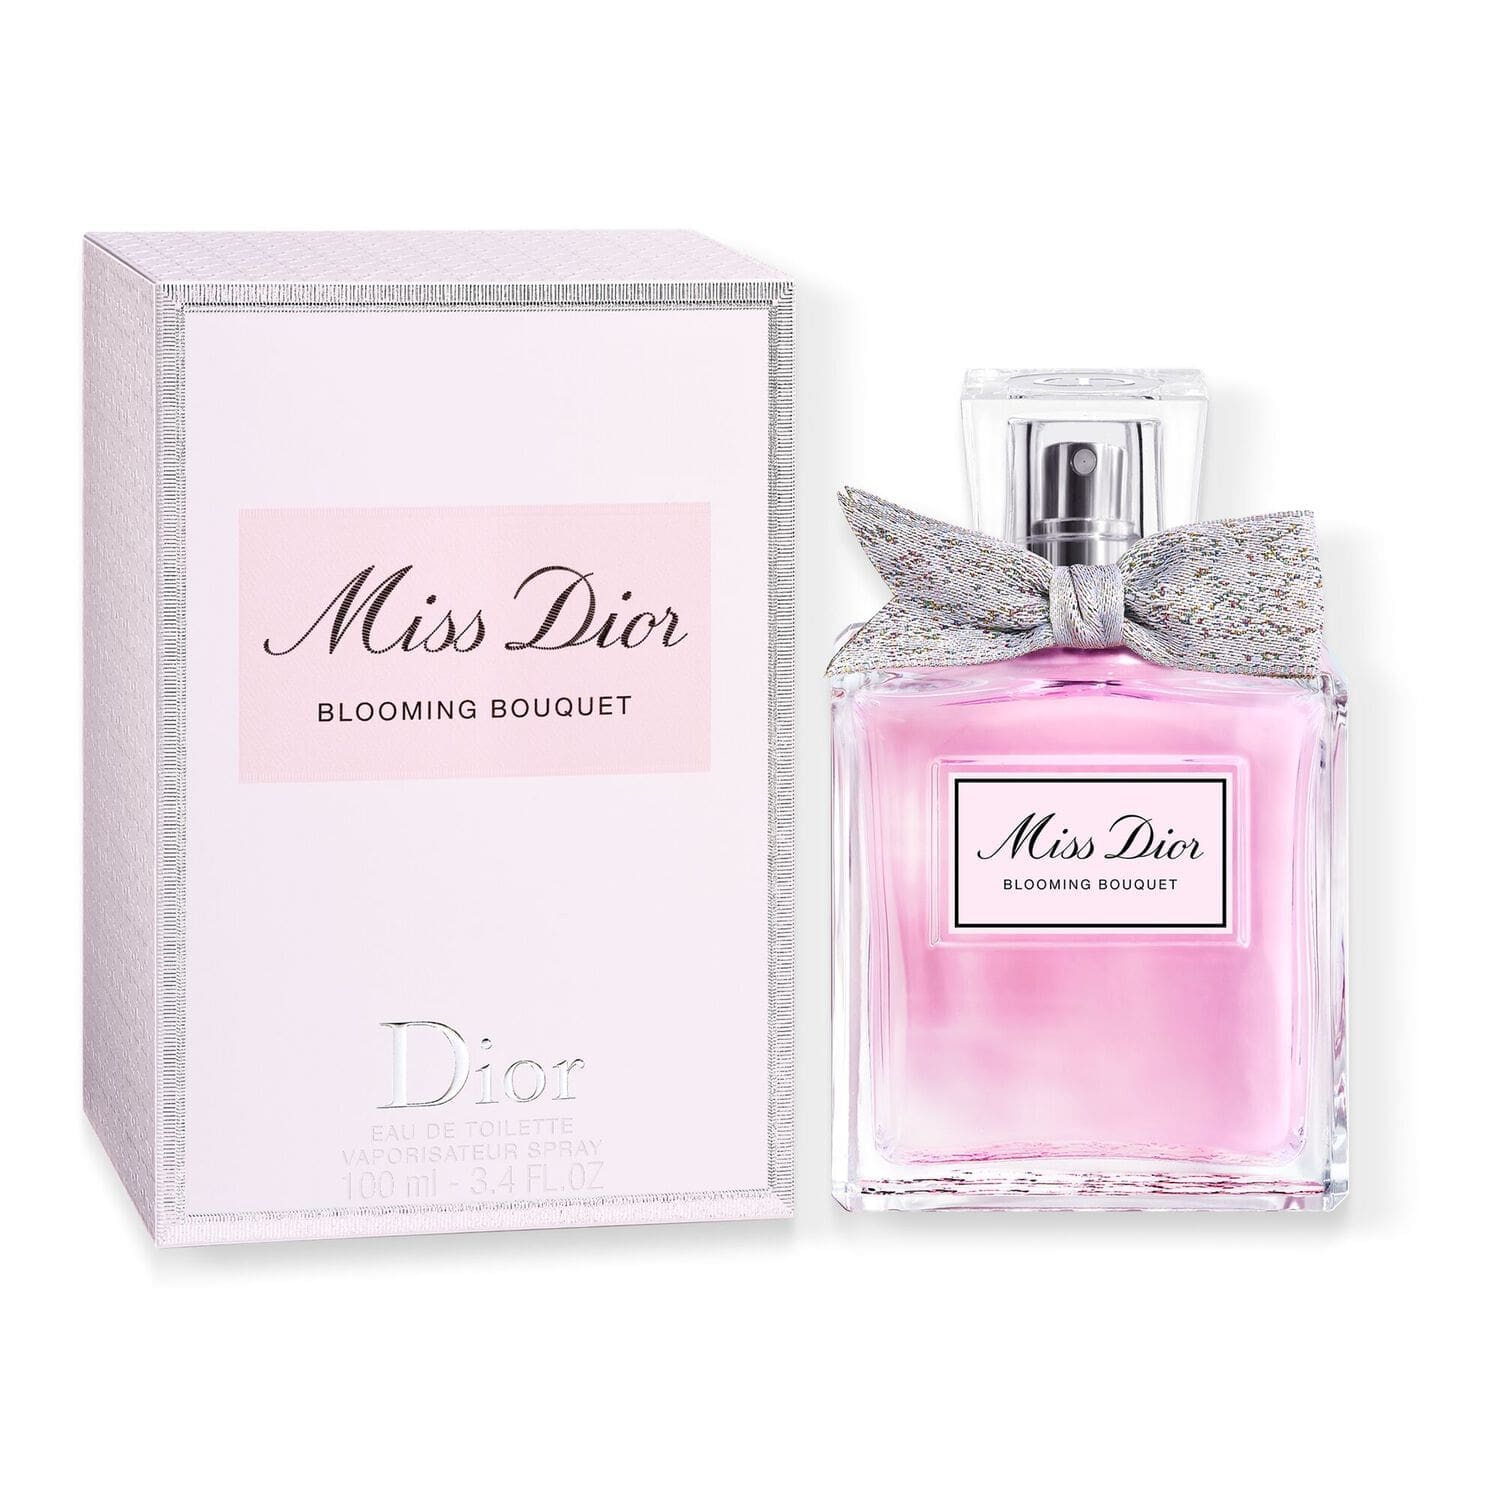 2560 MISS DIOR BLOOMING BOUQUET 100ML EDT